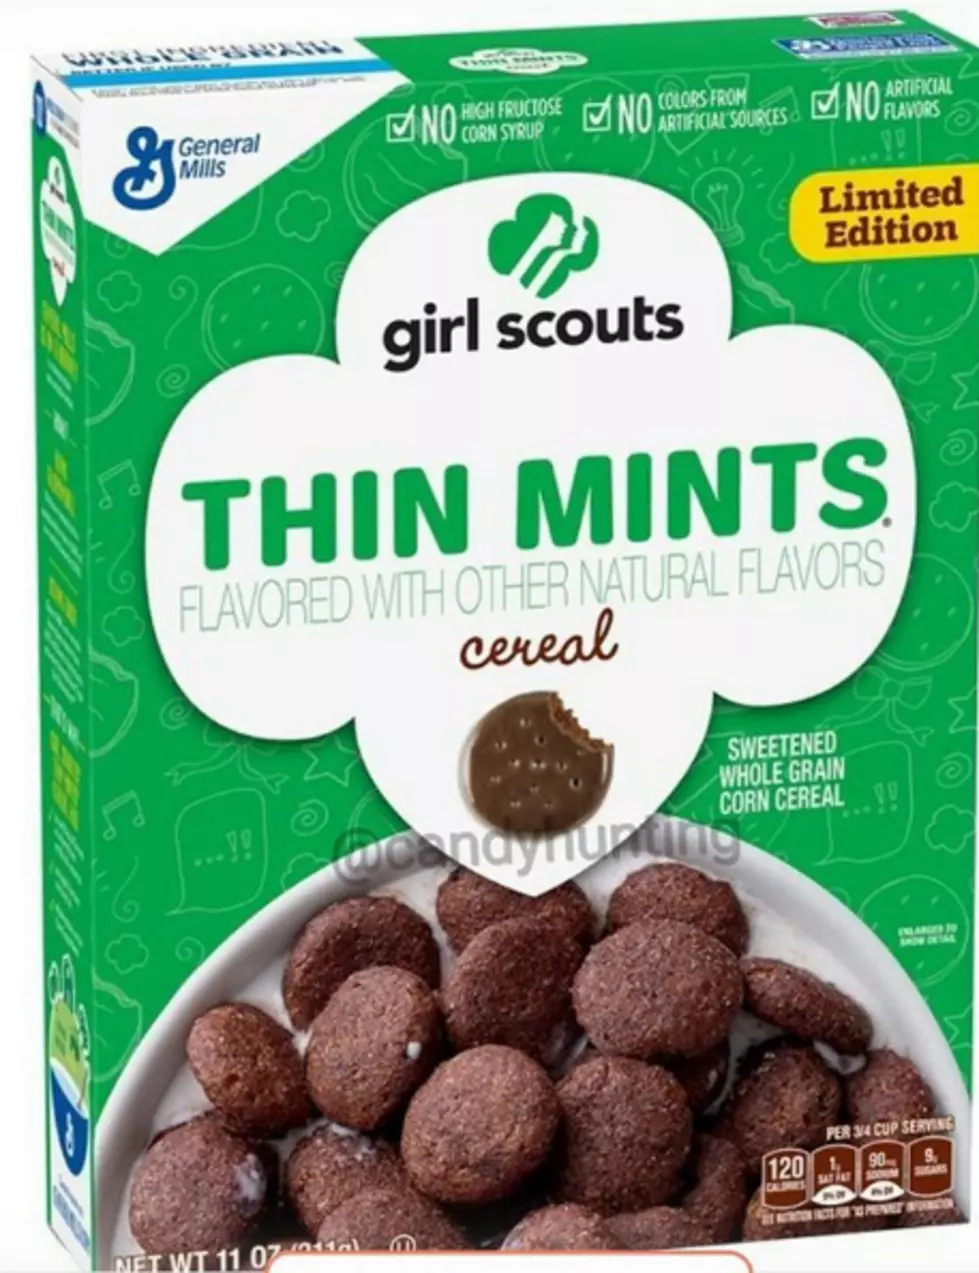 Girl Scout Cookie Cereals Are a Thing and Coming Soon